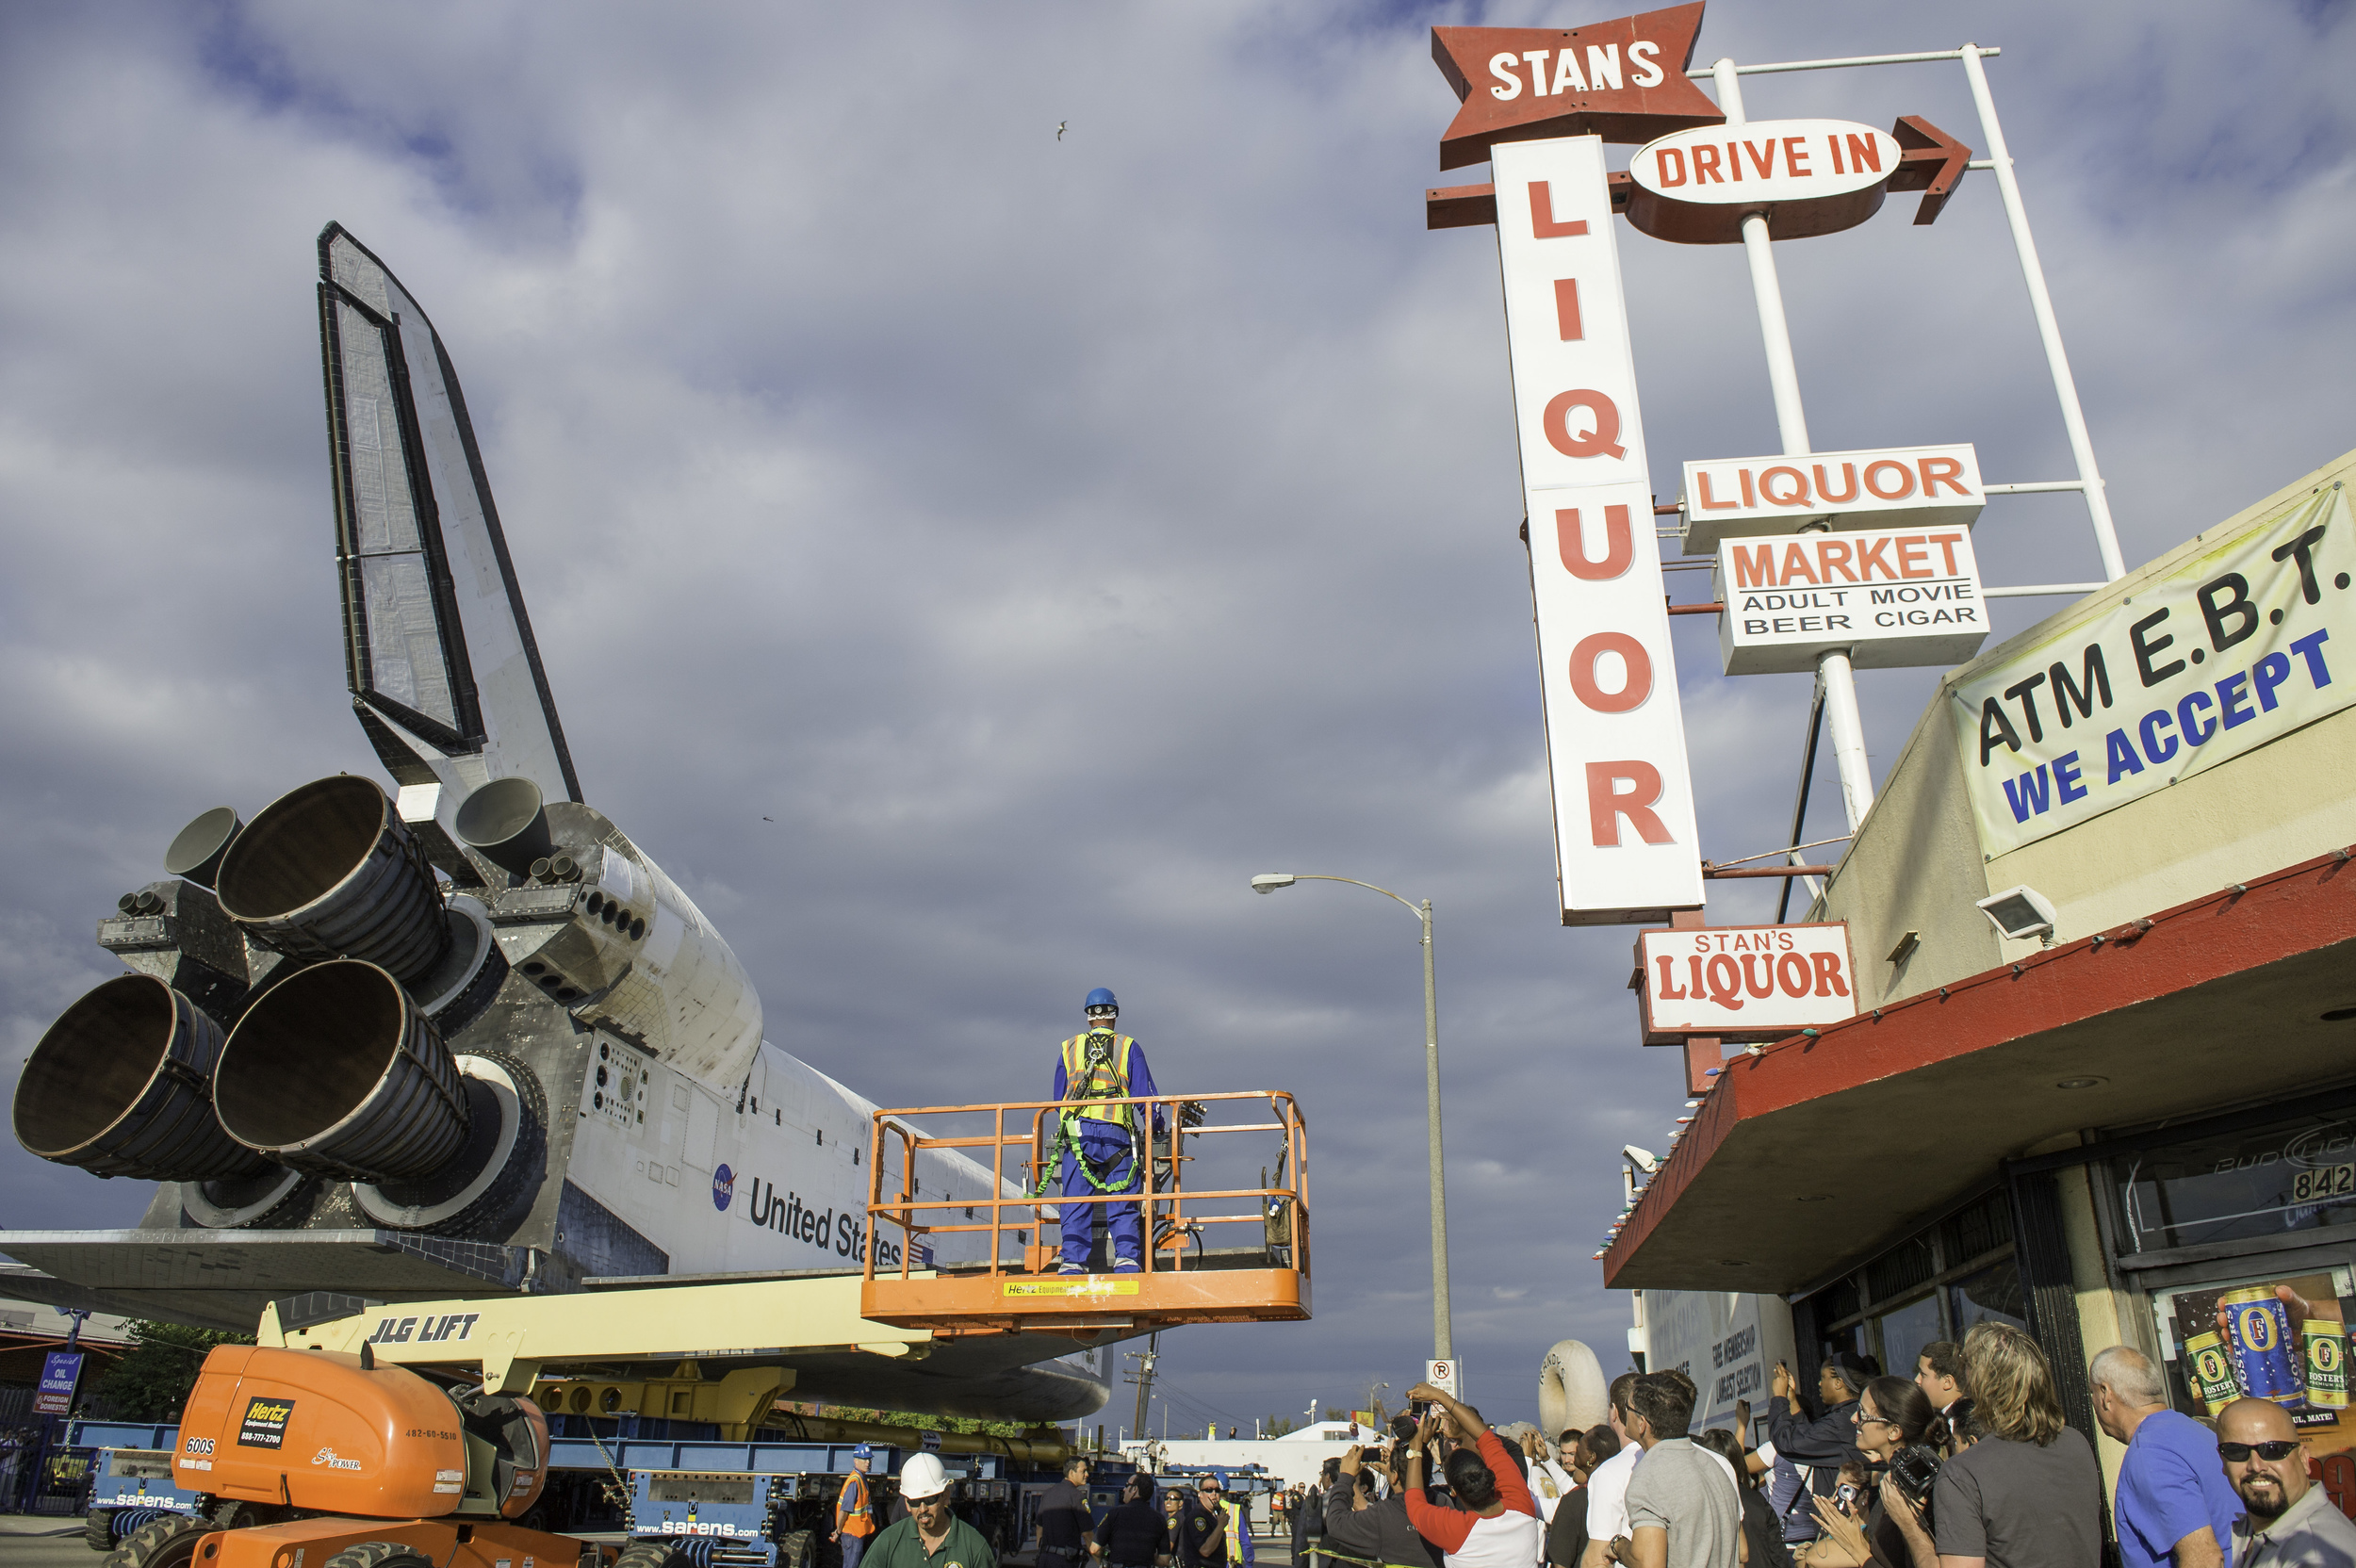  Space shuttle Endeavour is seen on its way to its new home at the California Science Center in Los Angeles, Friday, Oct. 12, 2012. Endeavour, built as a replacement for space shuttle Challenger, completed 25 missions, spent 299 days in orbit, and or